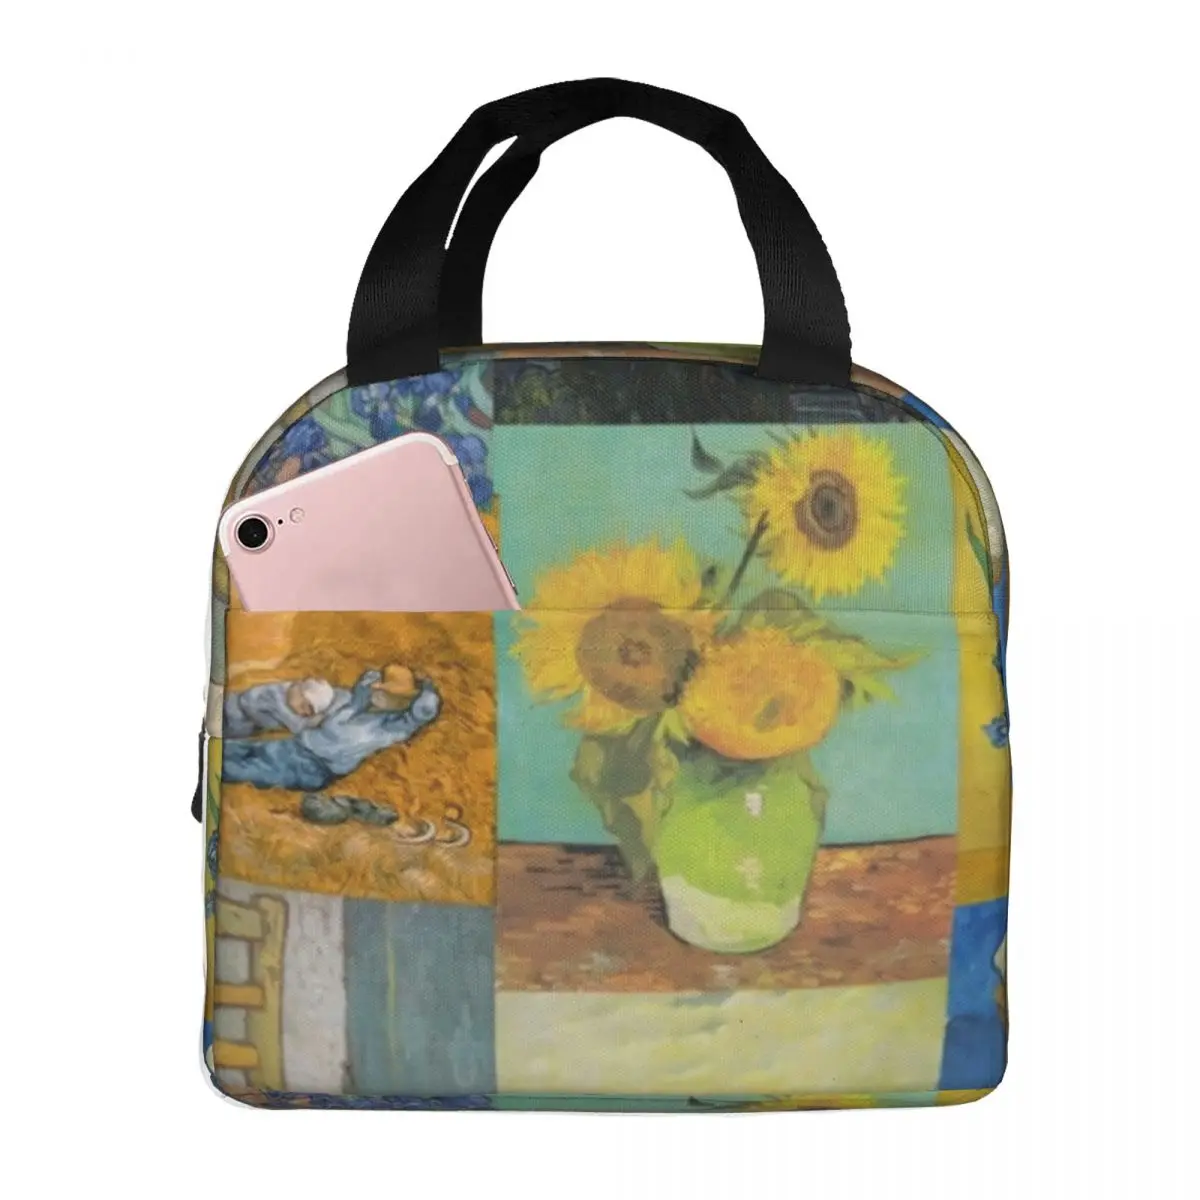 

Van Gogh Collage Lunch Bag with Handle Sunflowers Print Food Cooler Bag Fancy Cooling Refrigerator Thermal Bag